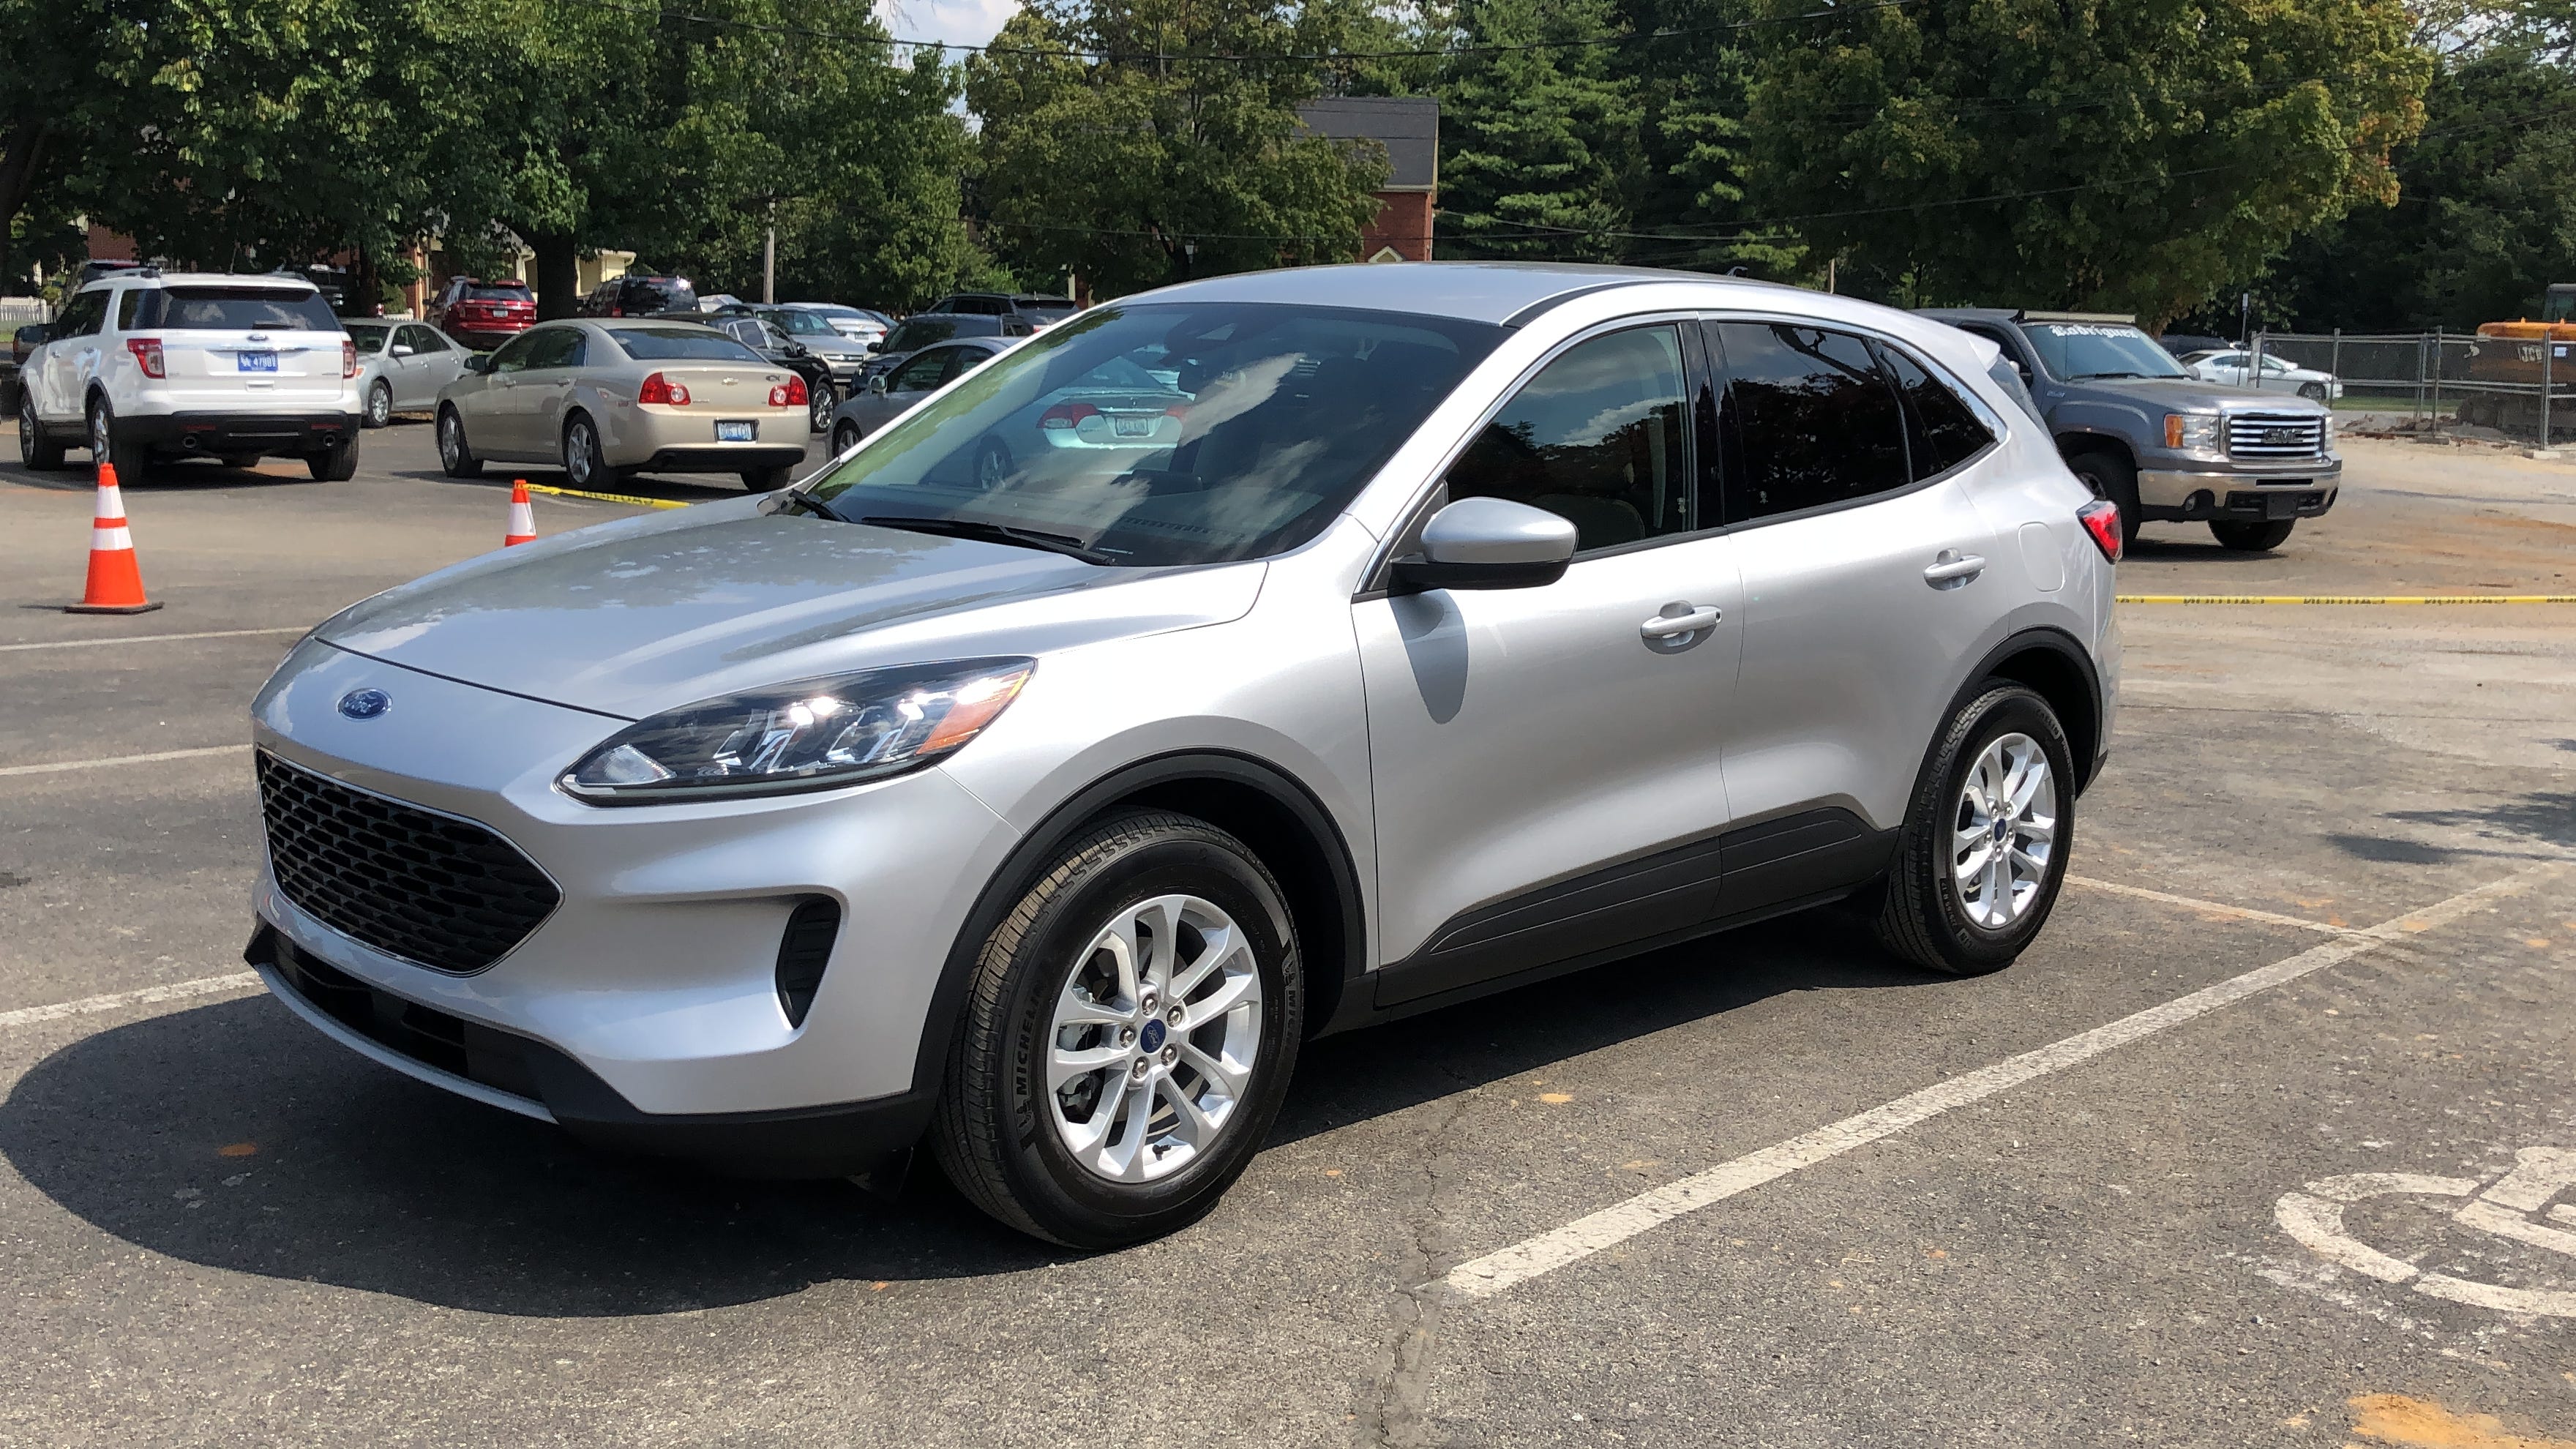 2020 Ford Escape review Buyers will love hybrid, features, safety